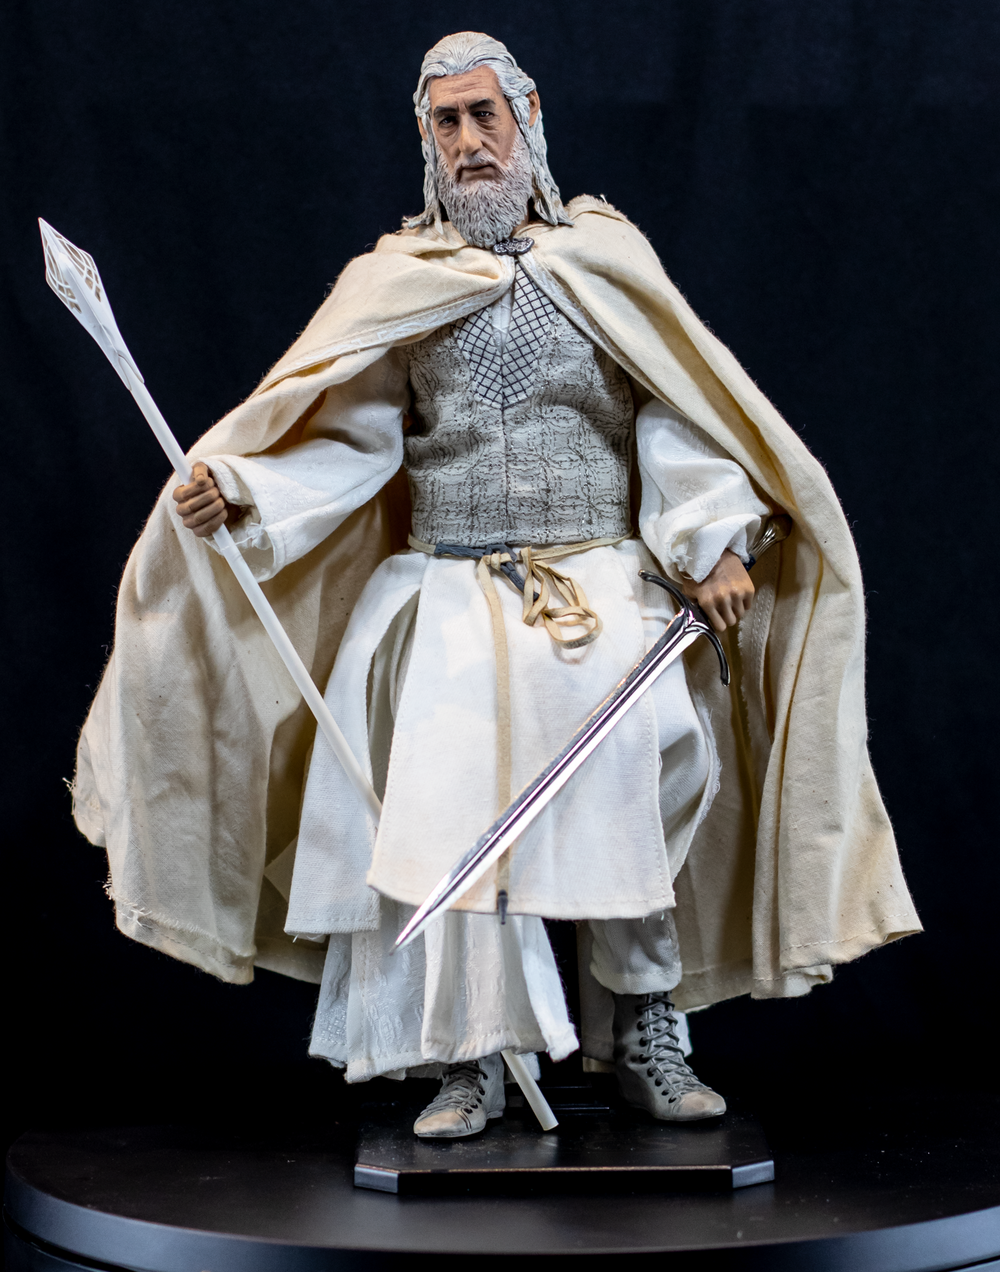 Lord Of The Rings: Return of the King "Gandalf the White"